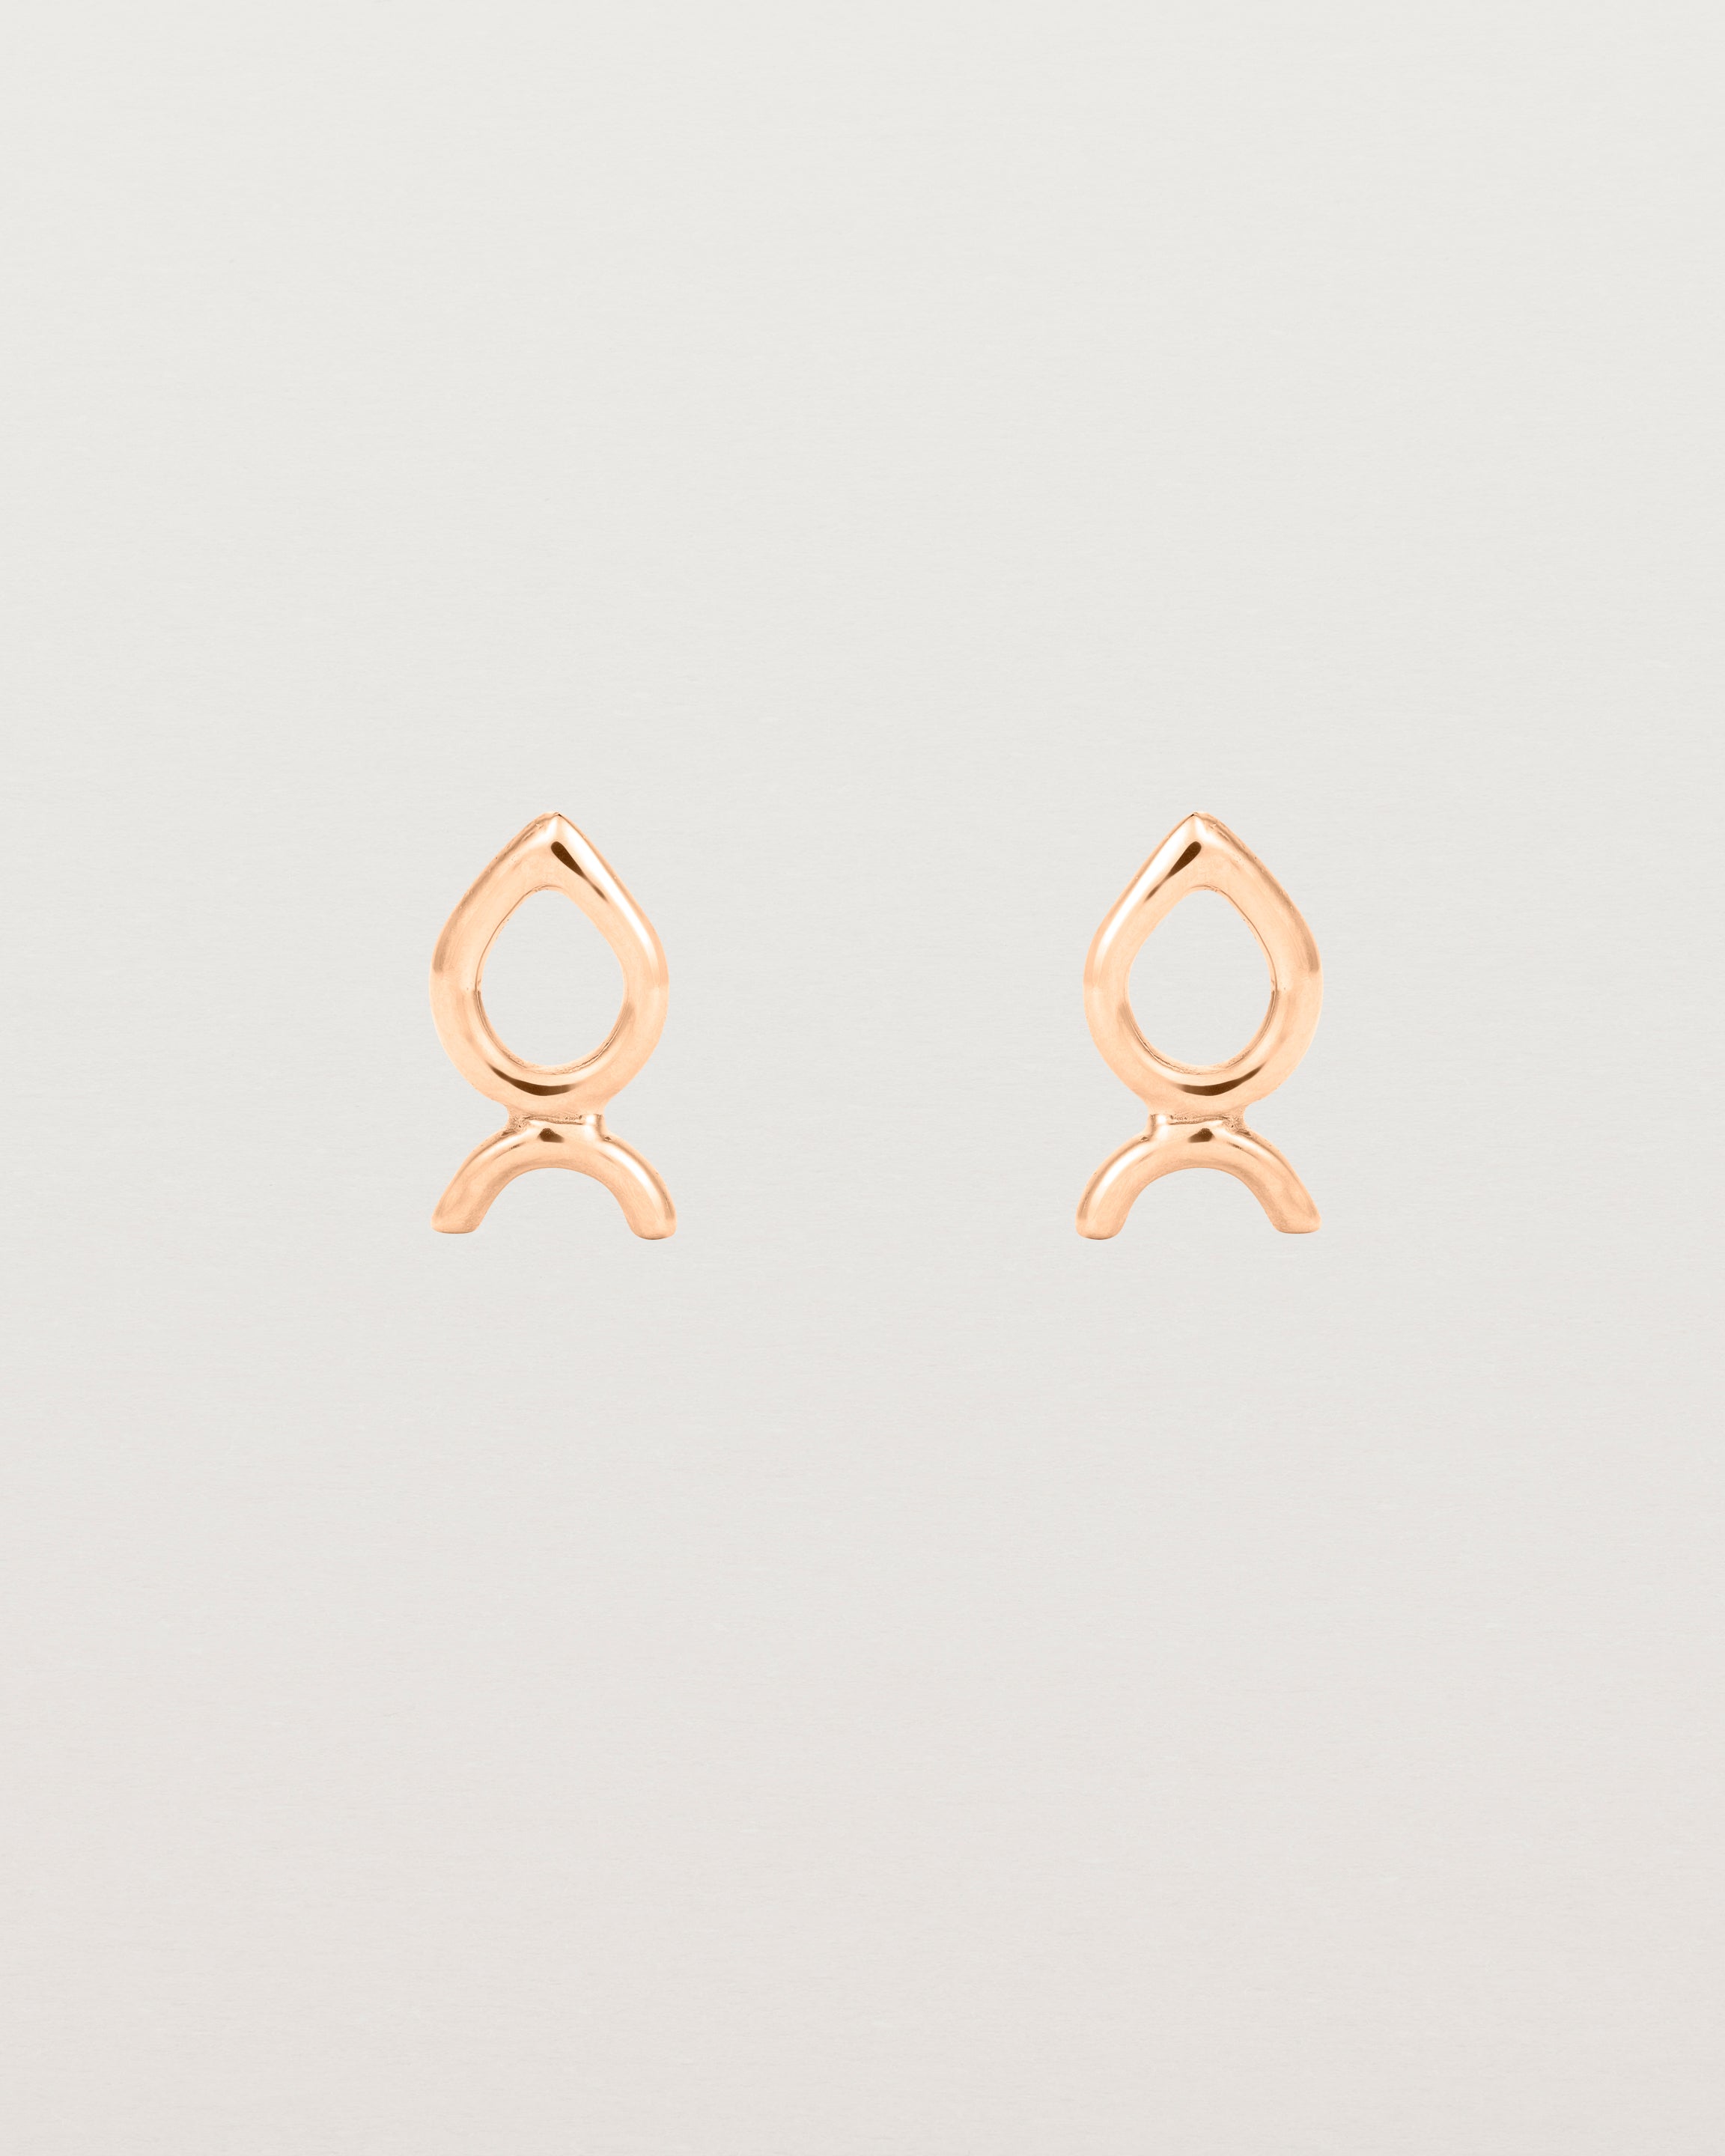 A small pair of rose gold studs shaped like a tear drop